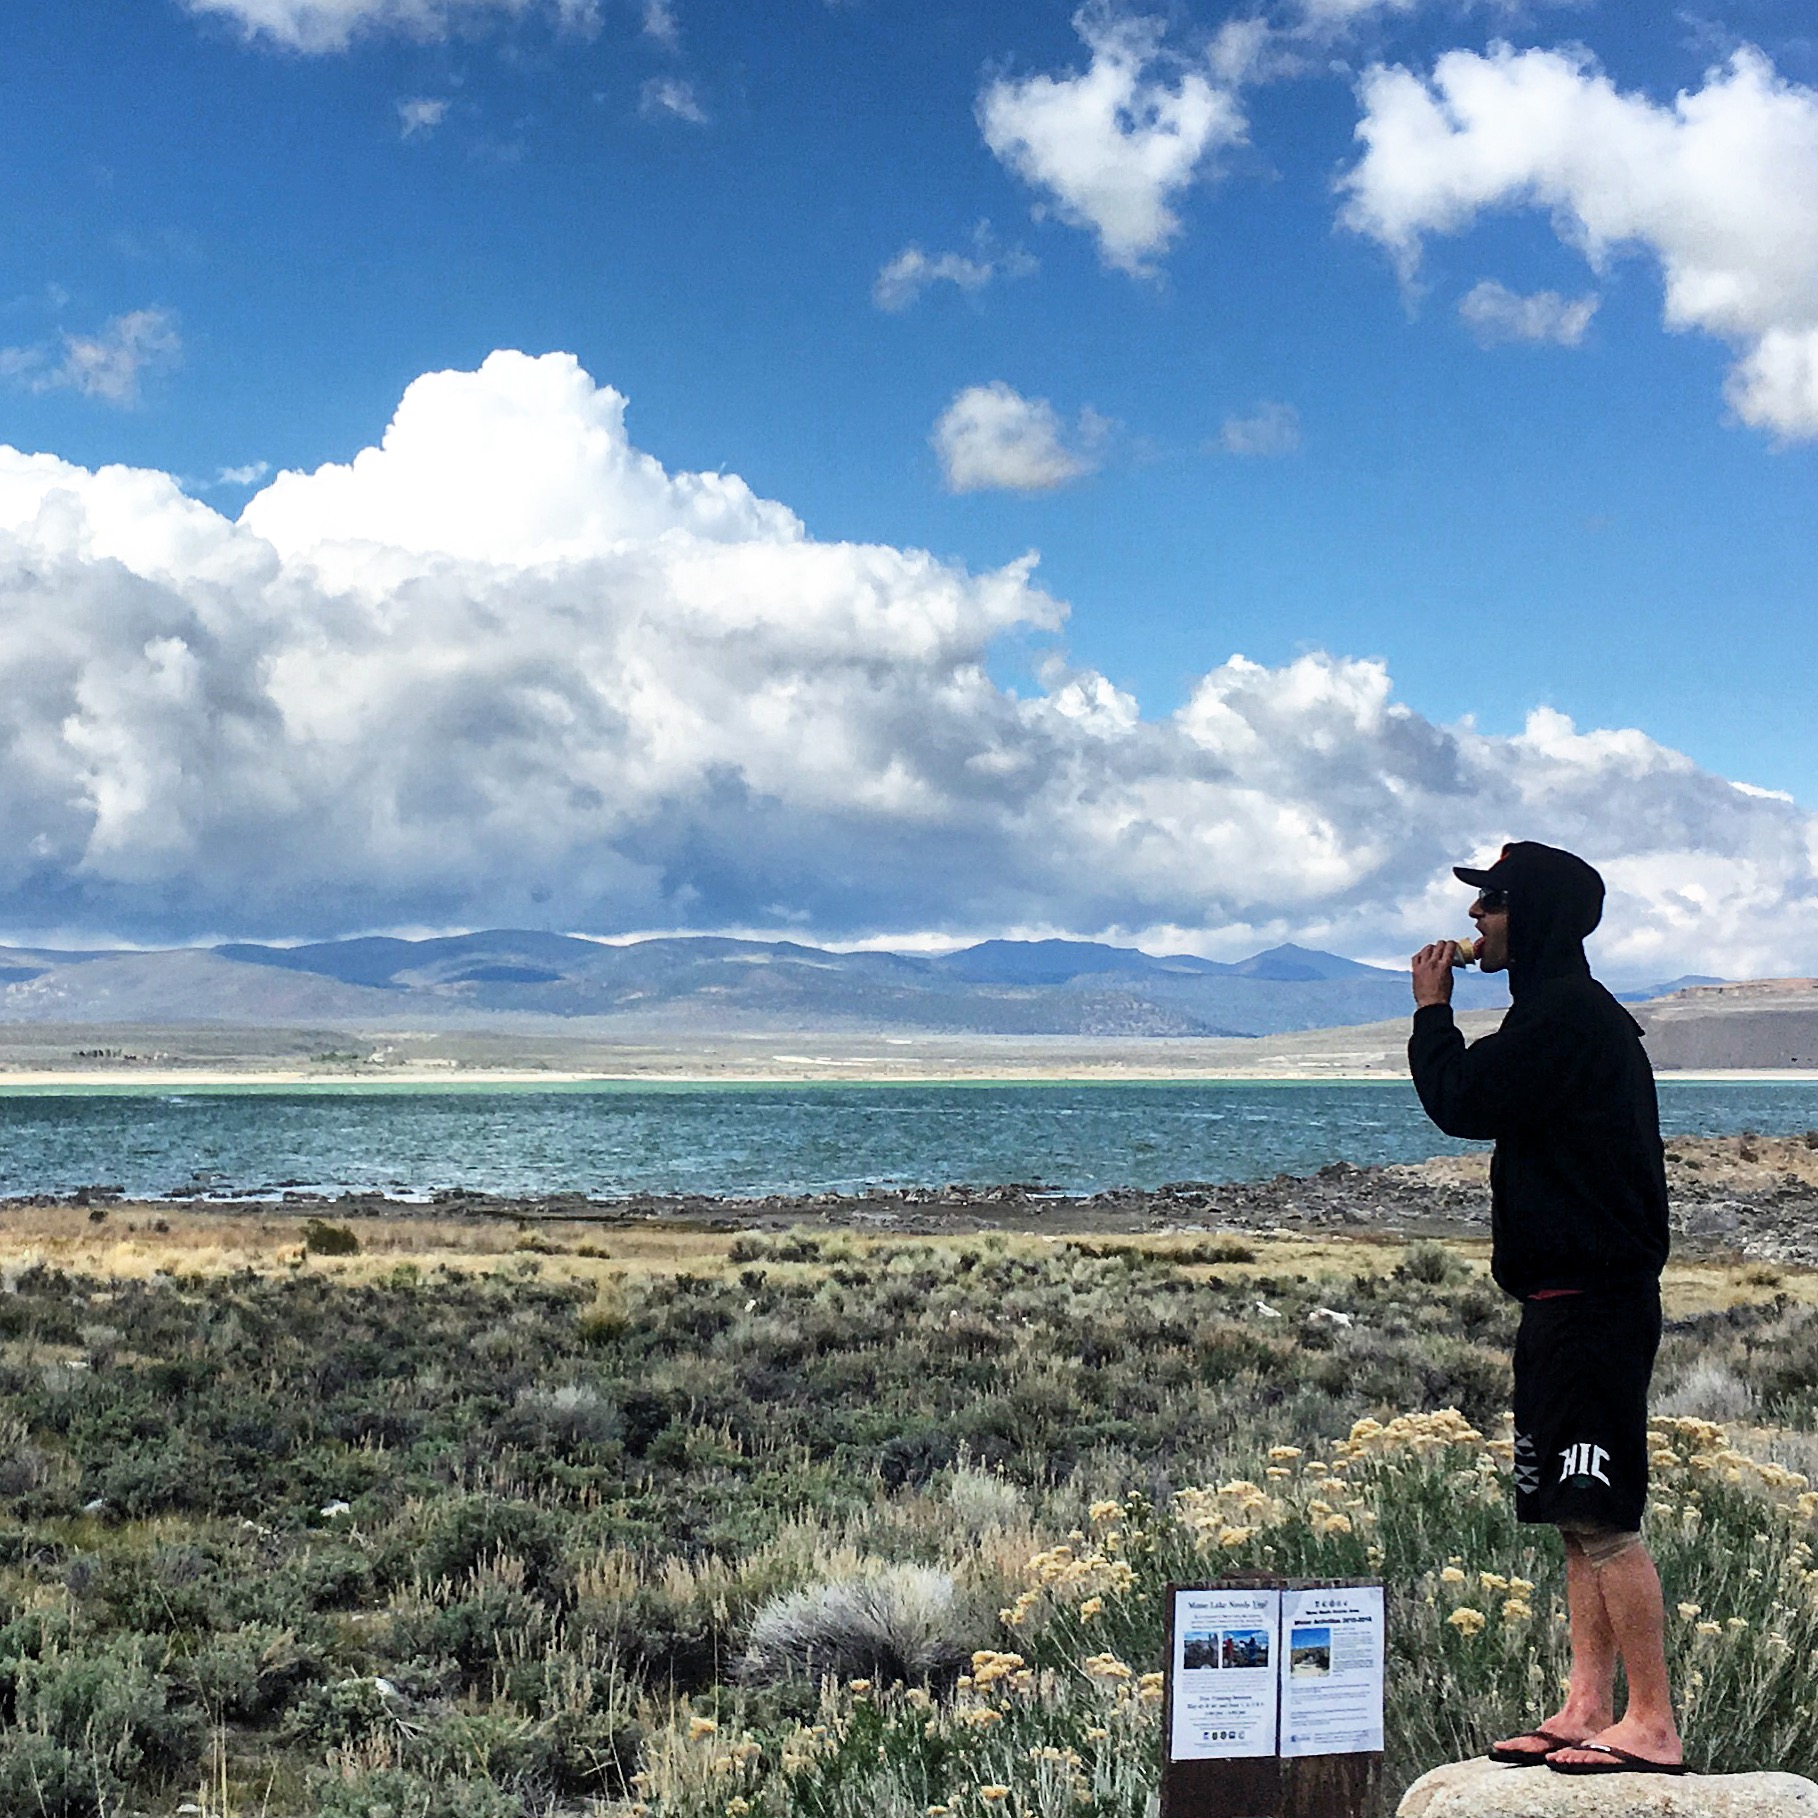 Miles loving the "Ice Cream Highway" at Mono Lake yesterday. photo: yimmers/snowbrains